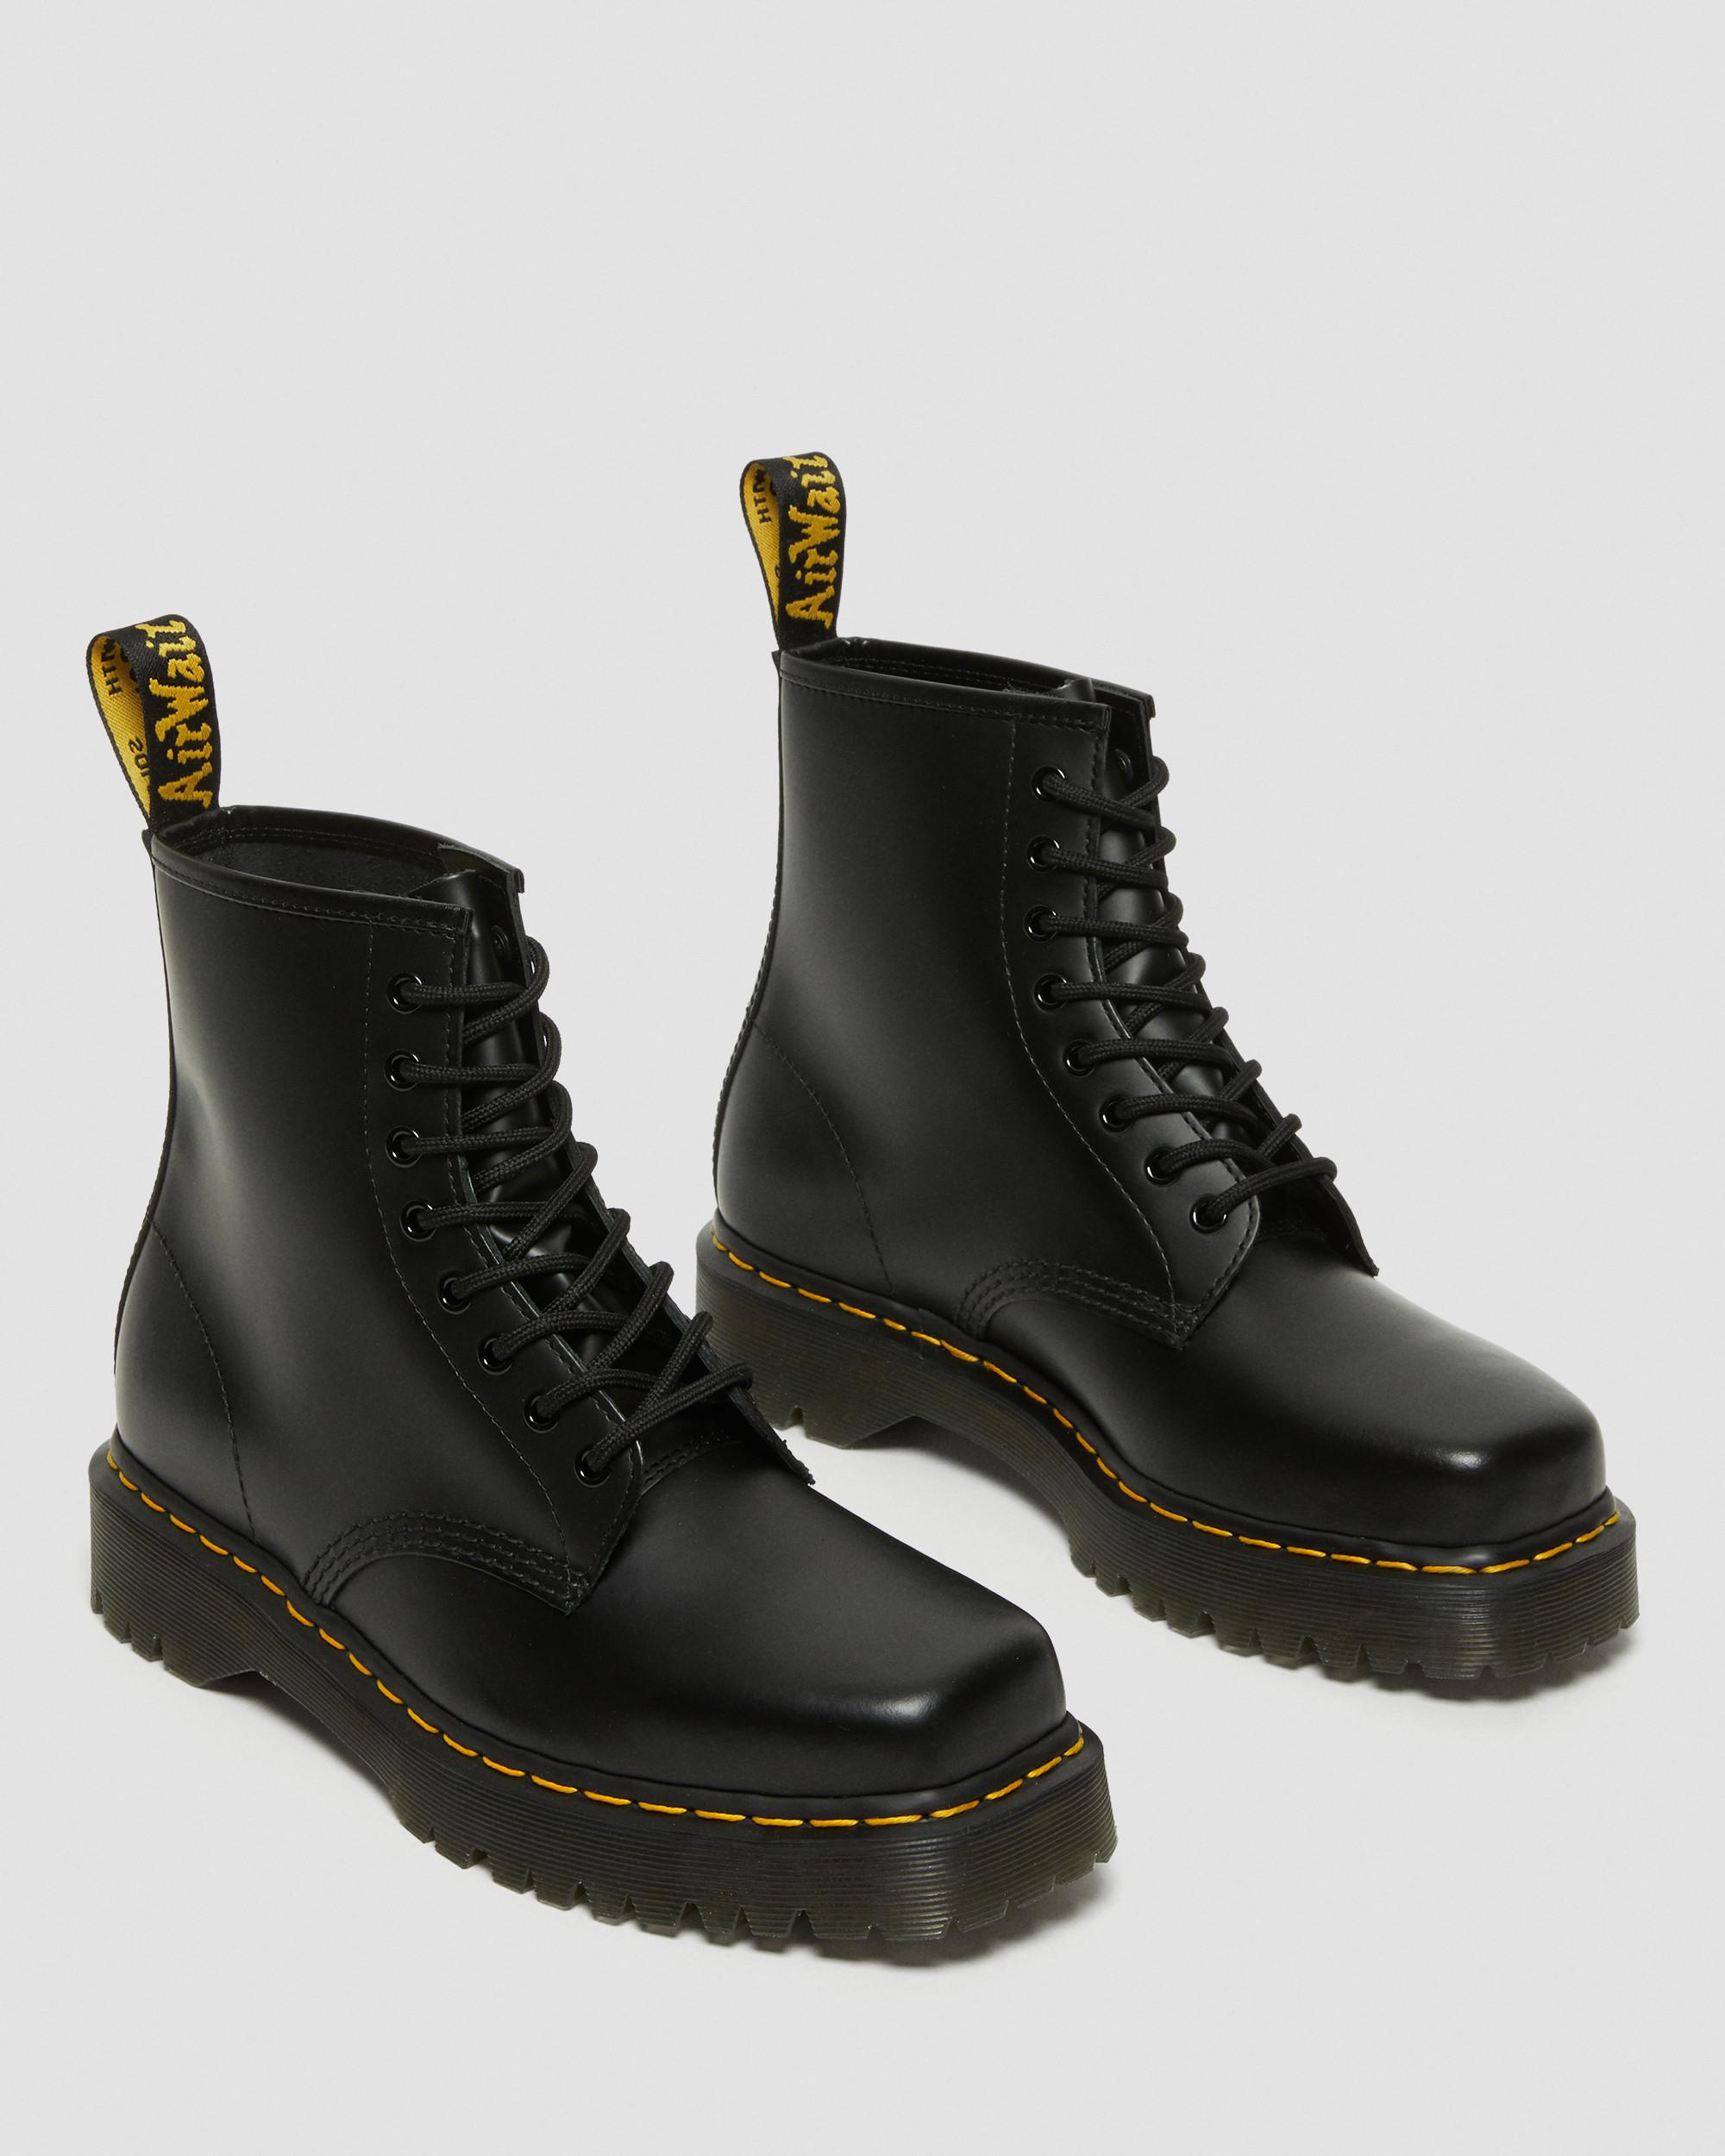 1460 Bex Squared Toe Leather Lace Up Boots, Black | Dr. Martens